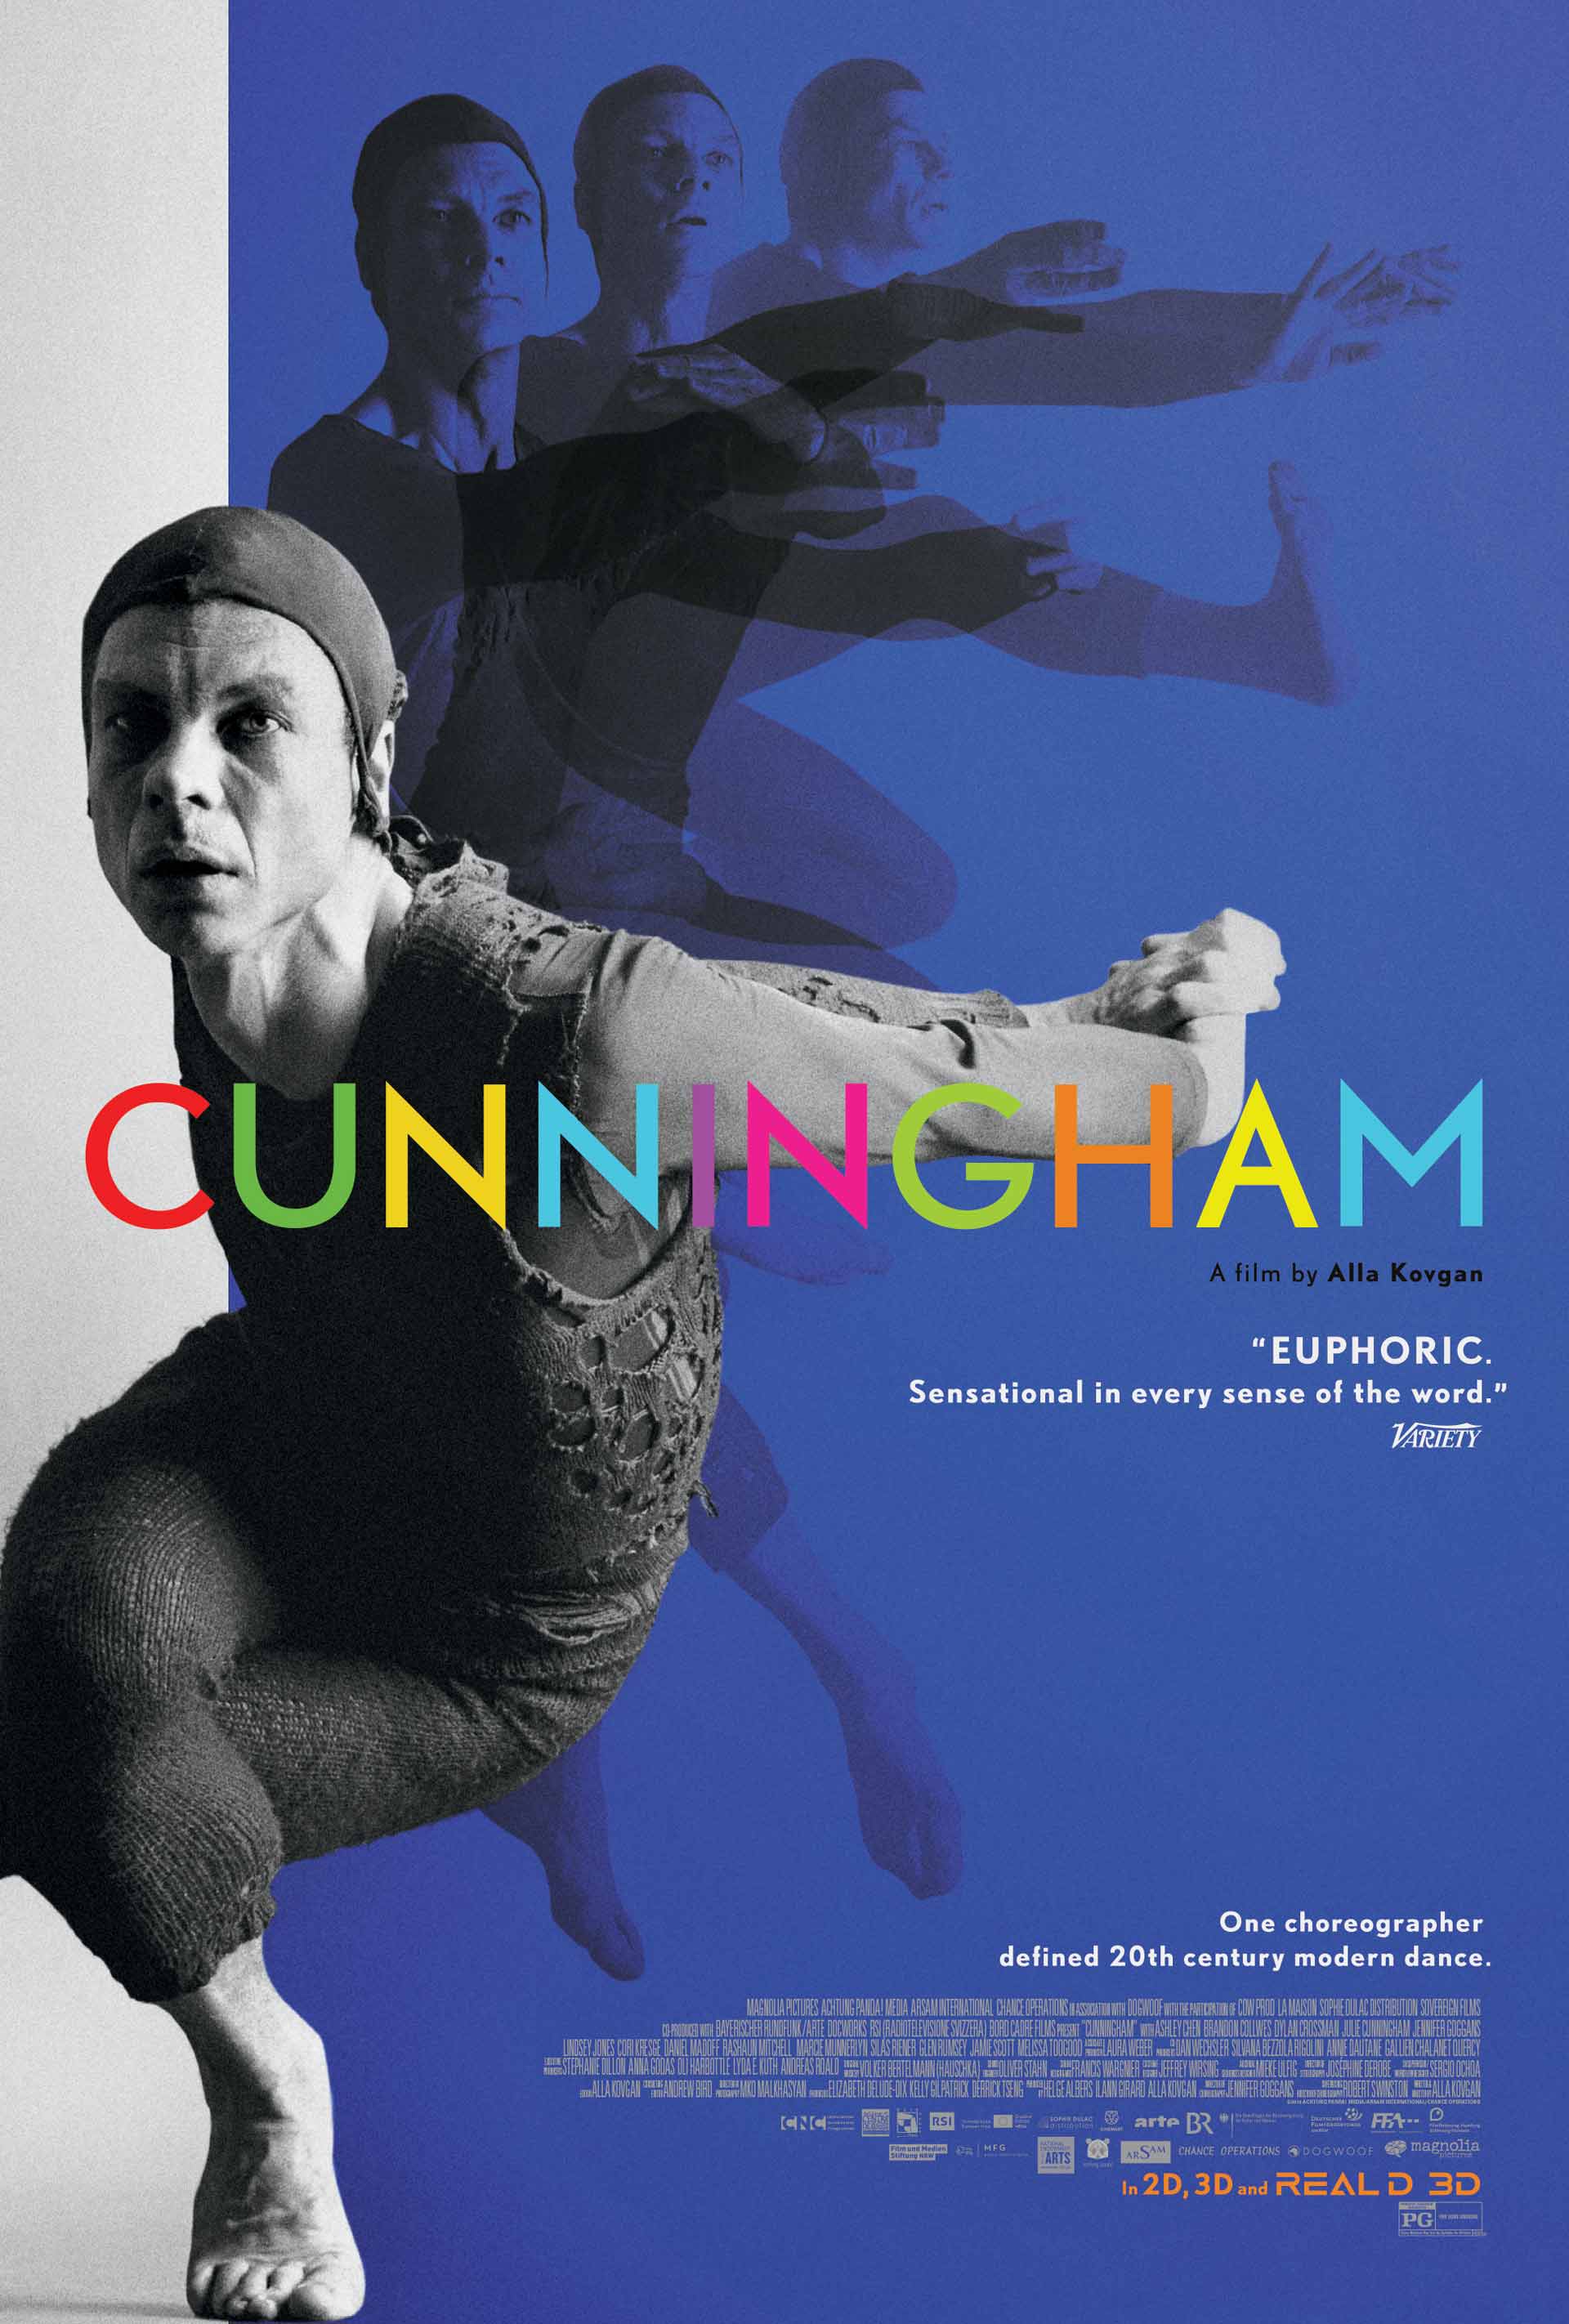 Theatrical poster with a black and white collage of a dancer in various poses on a blue background